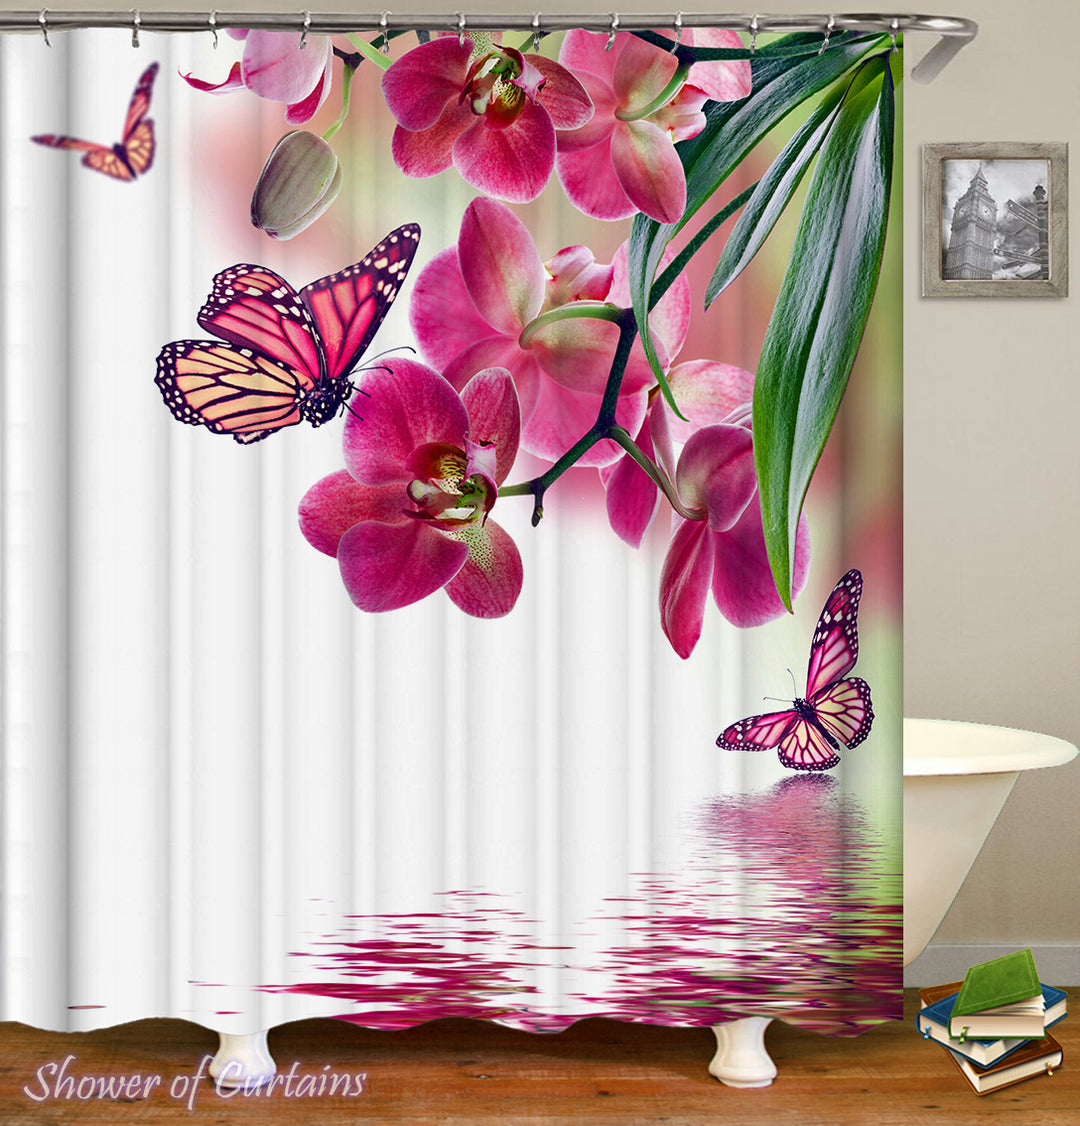 Floral Shower Curtain of Pinkish Butterflies And Flowers